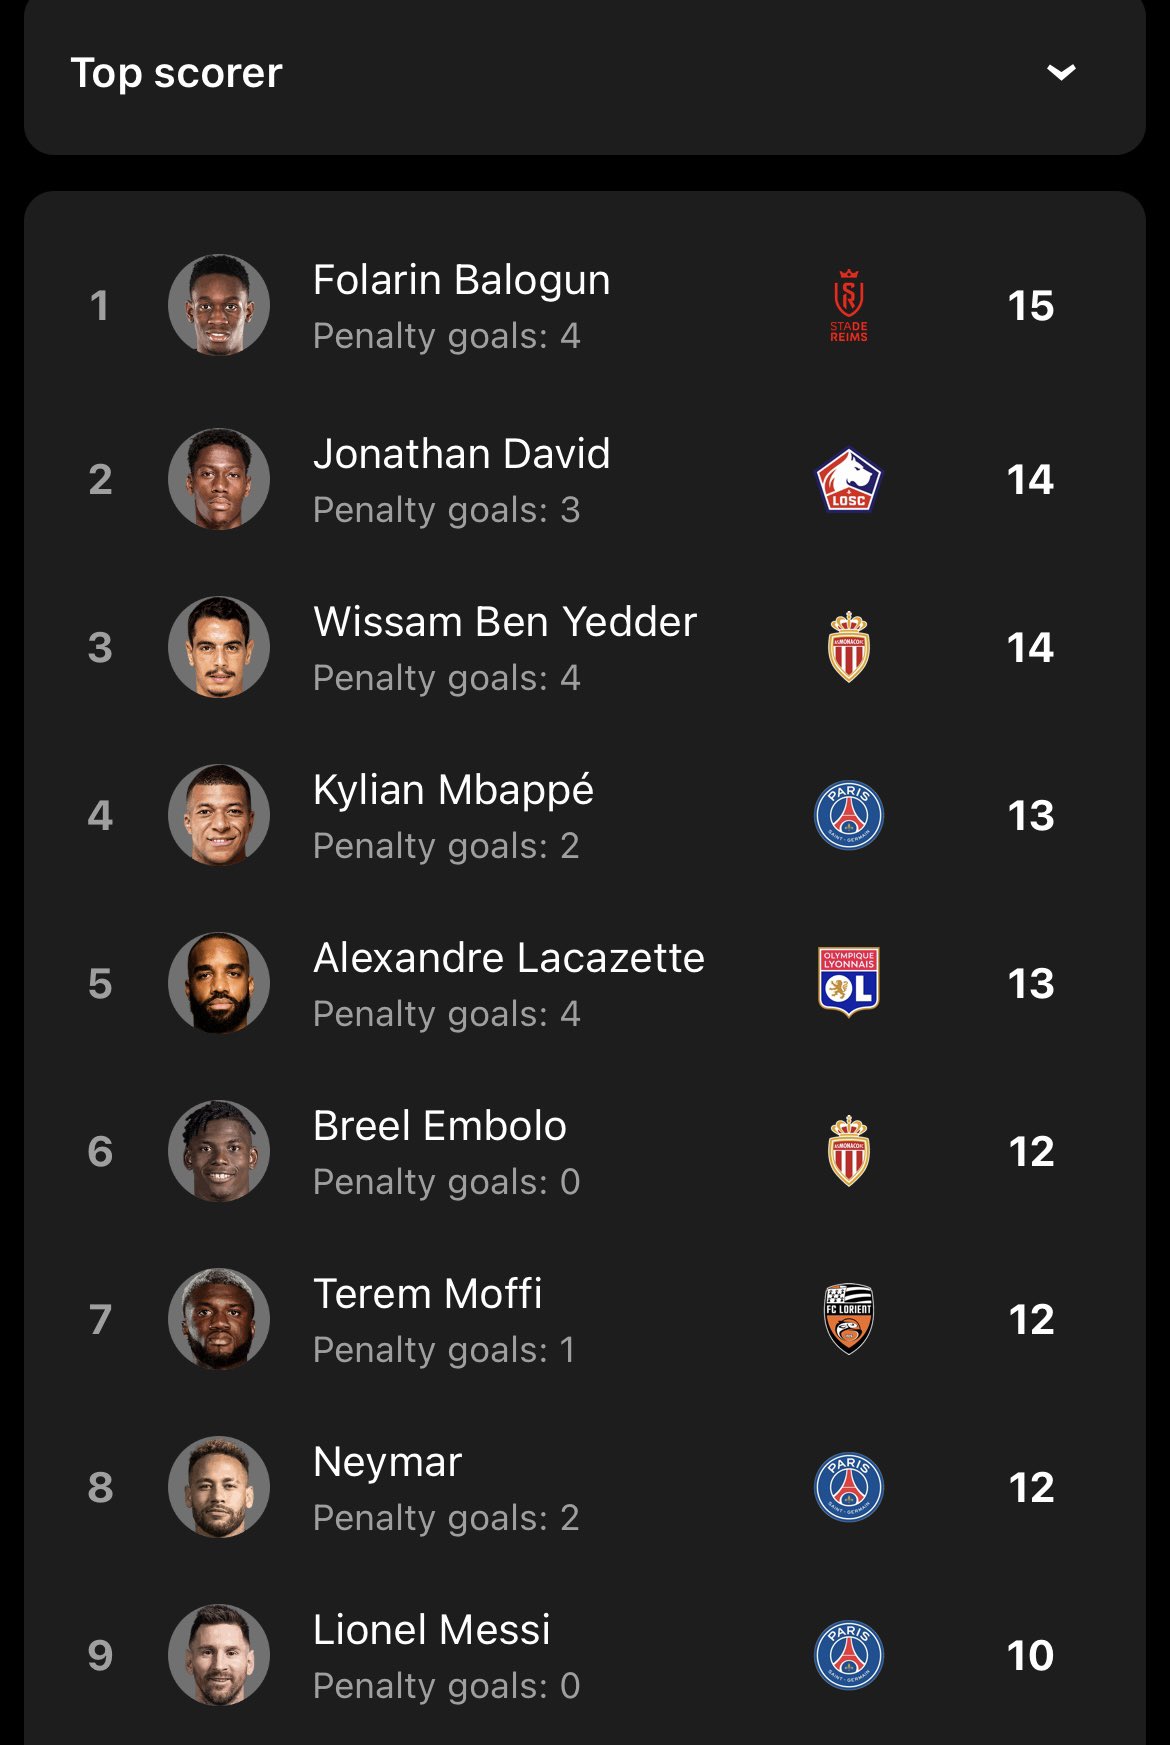 Tactical Manager on Twitter: "The top 2 goal scorers on Ligue 1 🇫🇷 are Americans https://t.co/mBveDfPwua" / Twitter